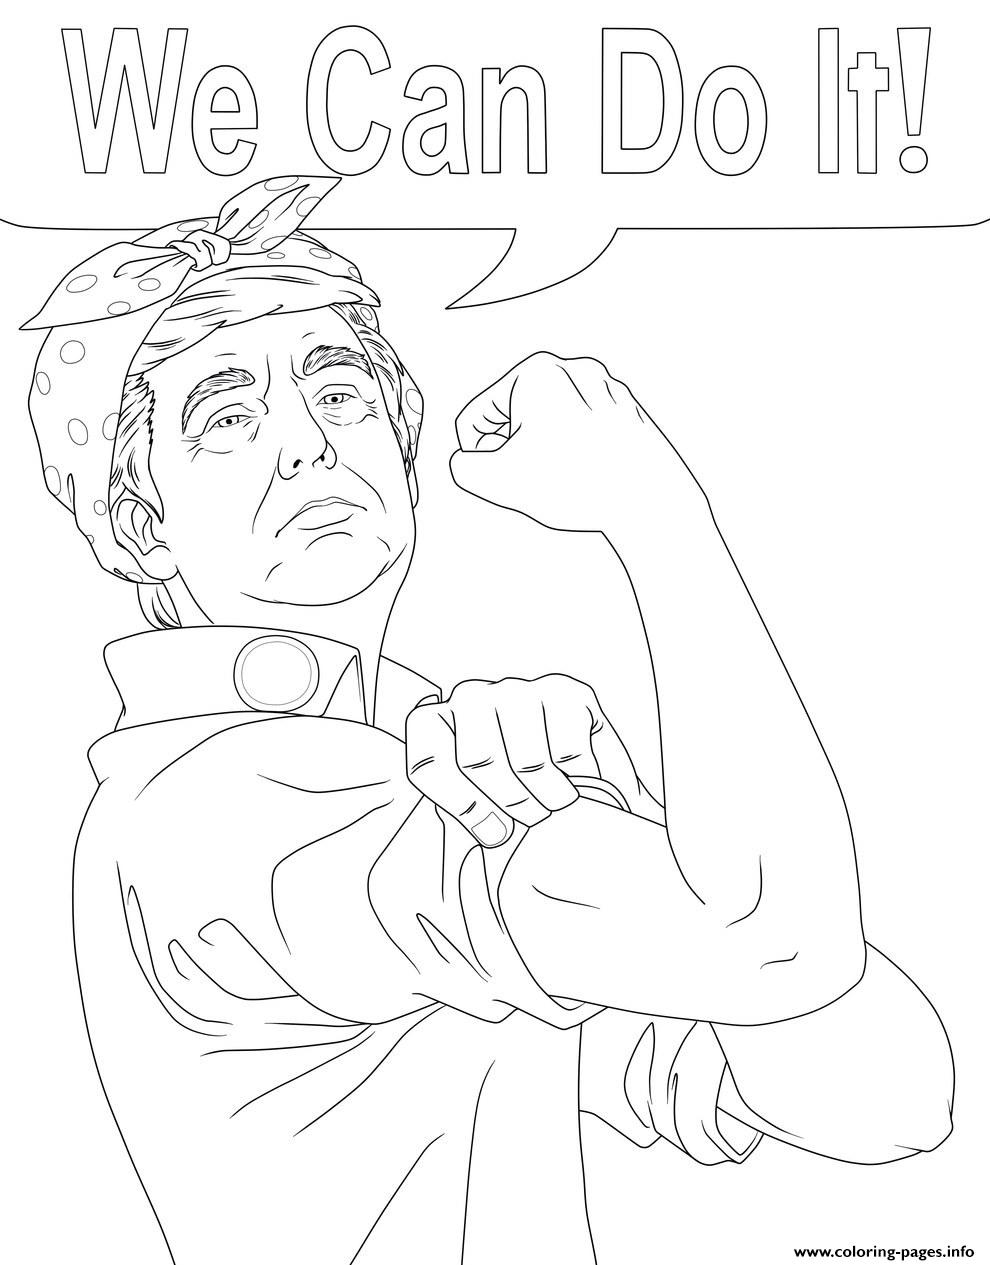 Donald Trump We Can Do It coloring